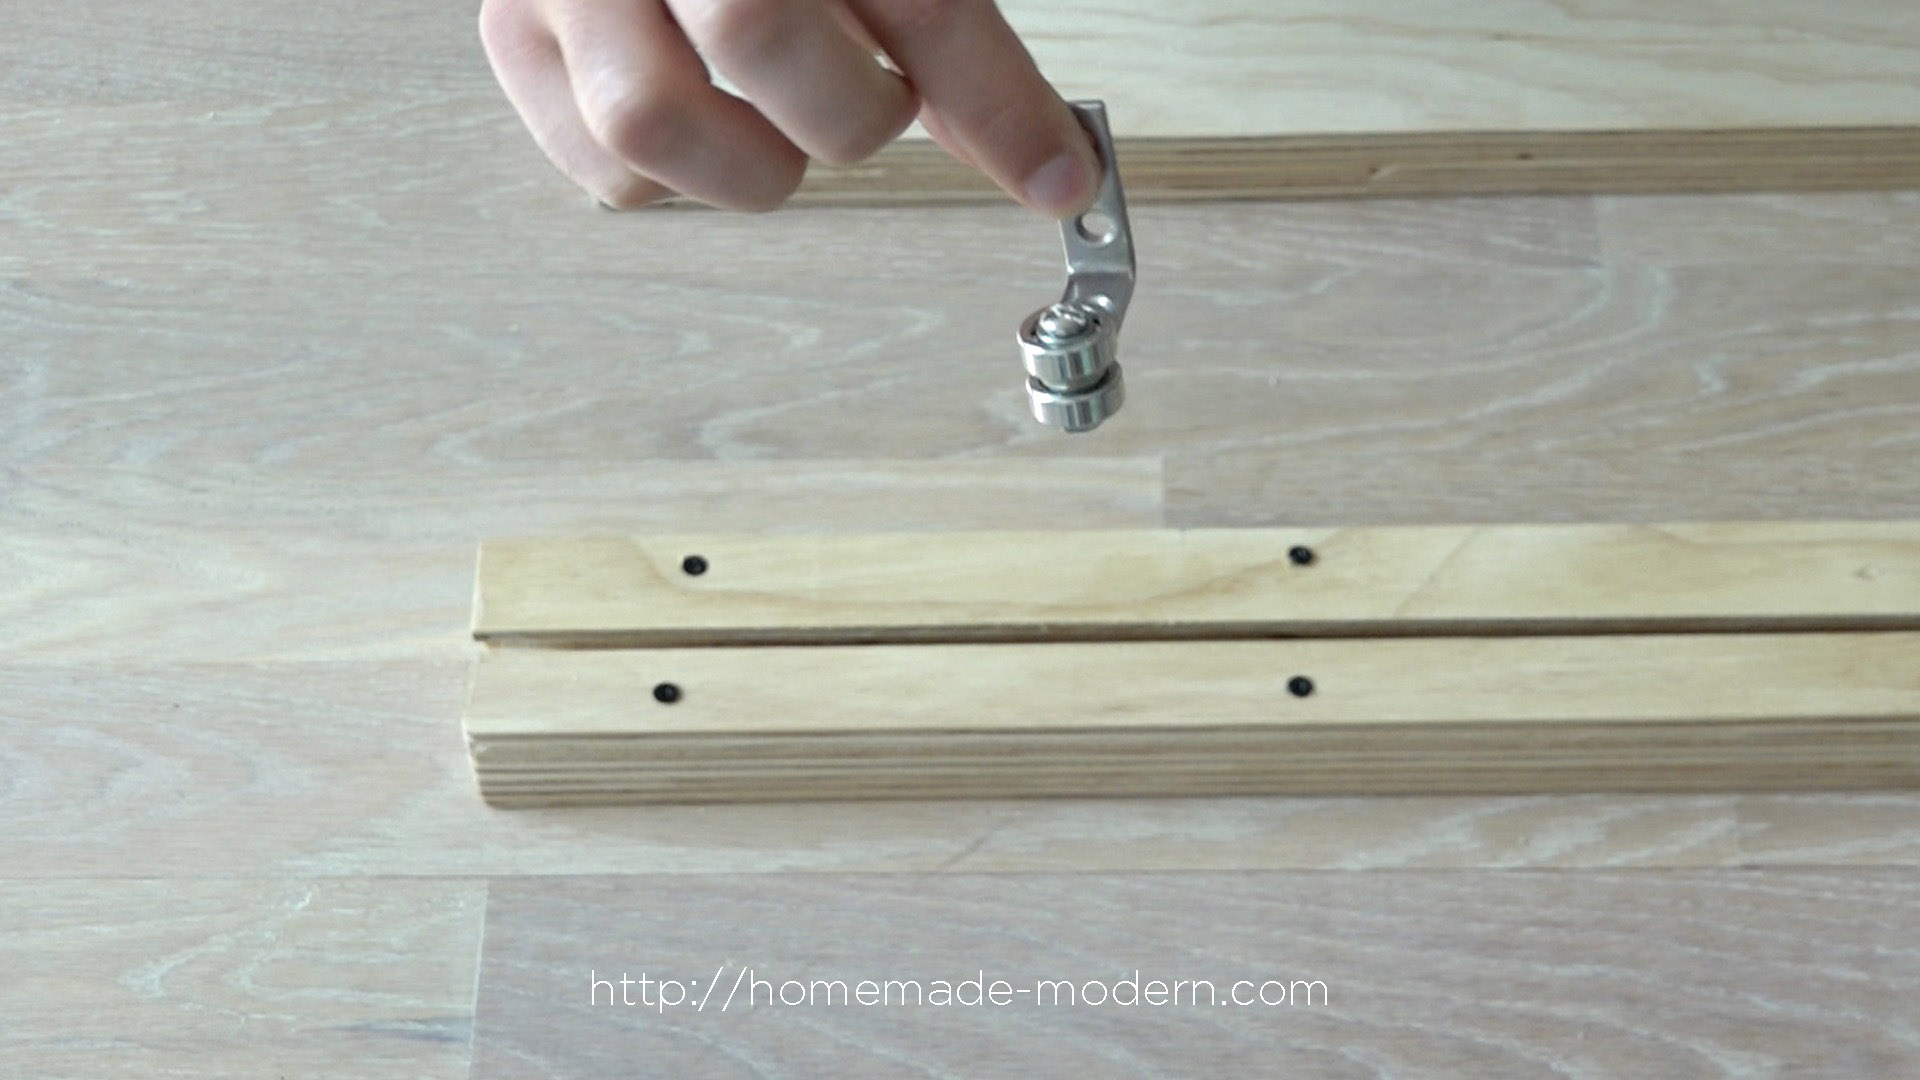 This bathroom mirror features DIY hardware that slides on plywood shelves. Full instructions can be found at HomeMade-Modern.com